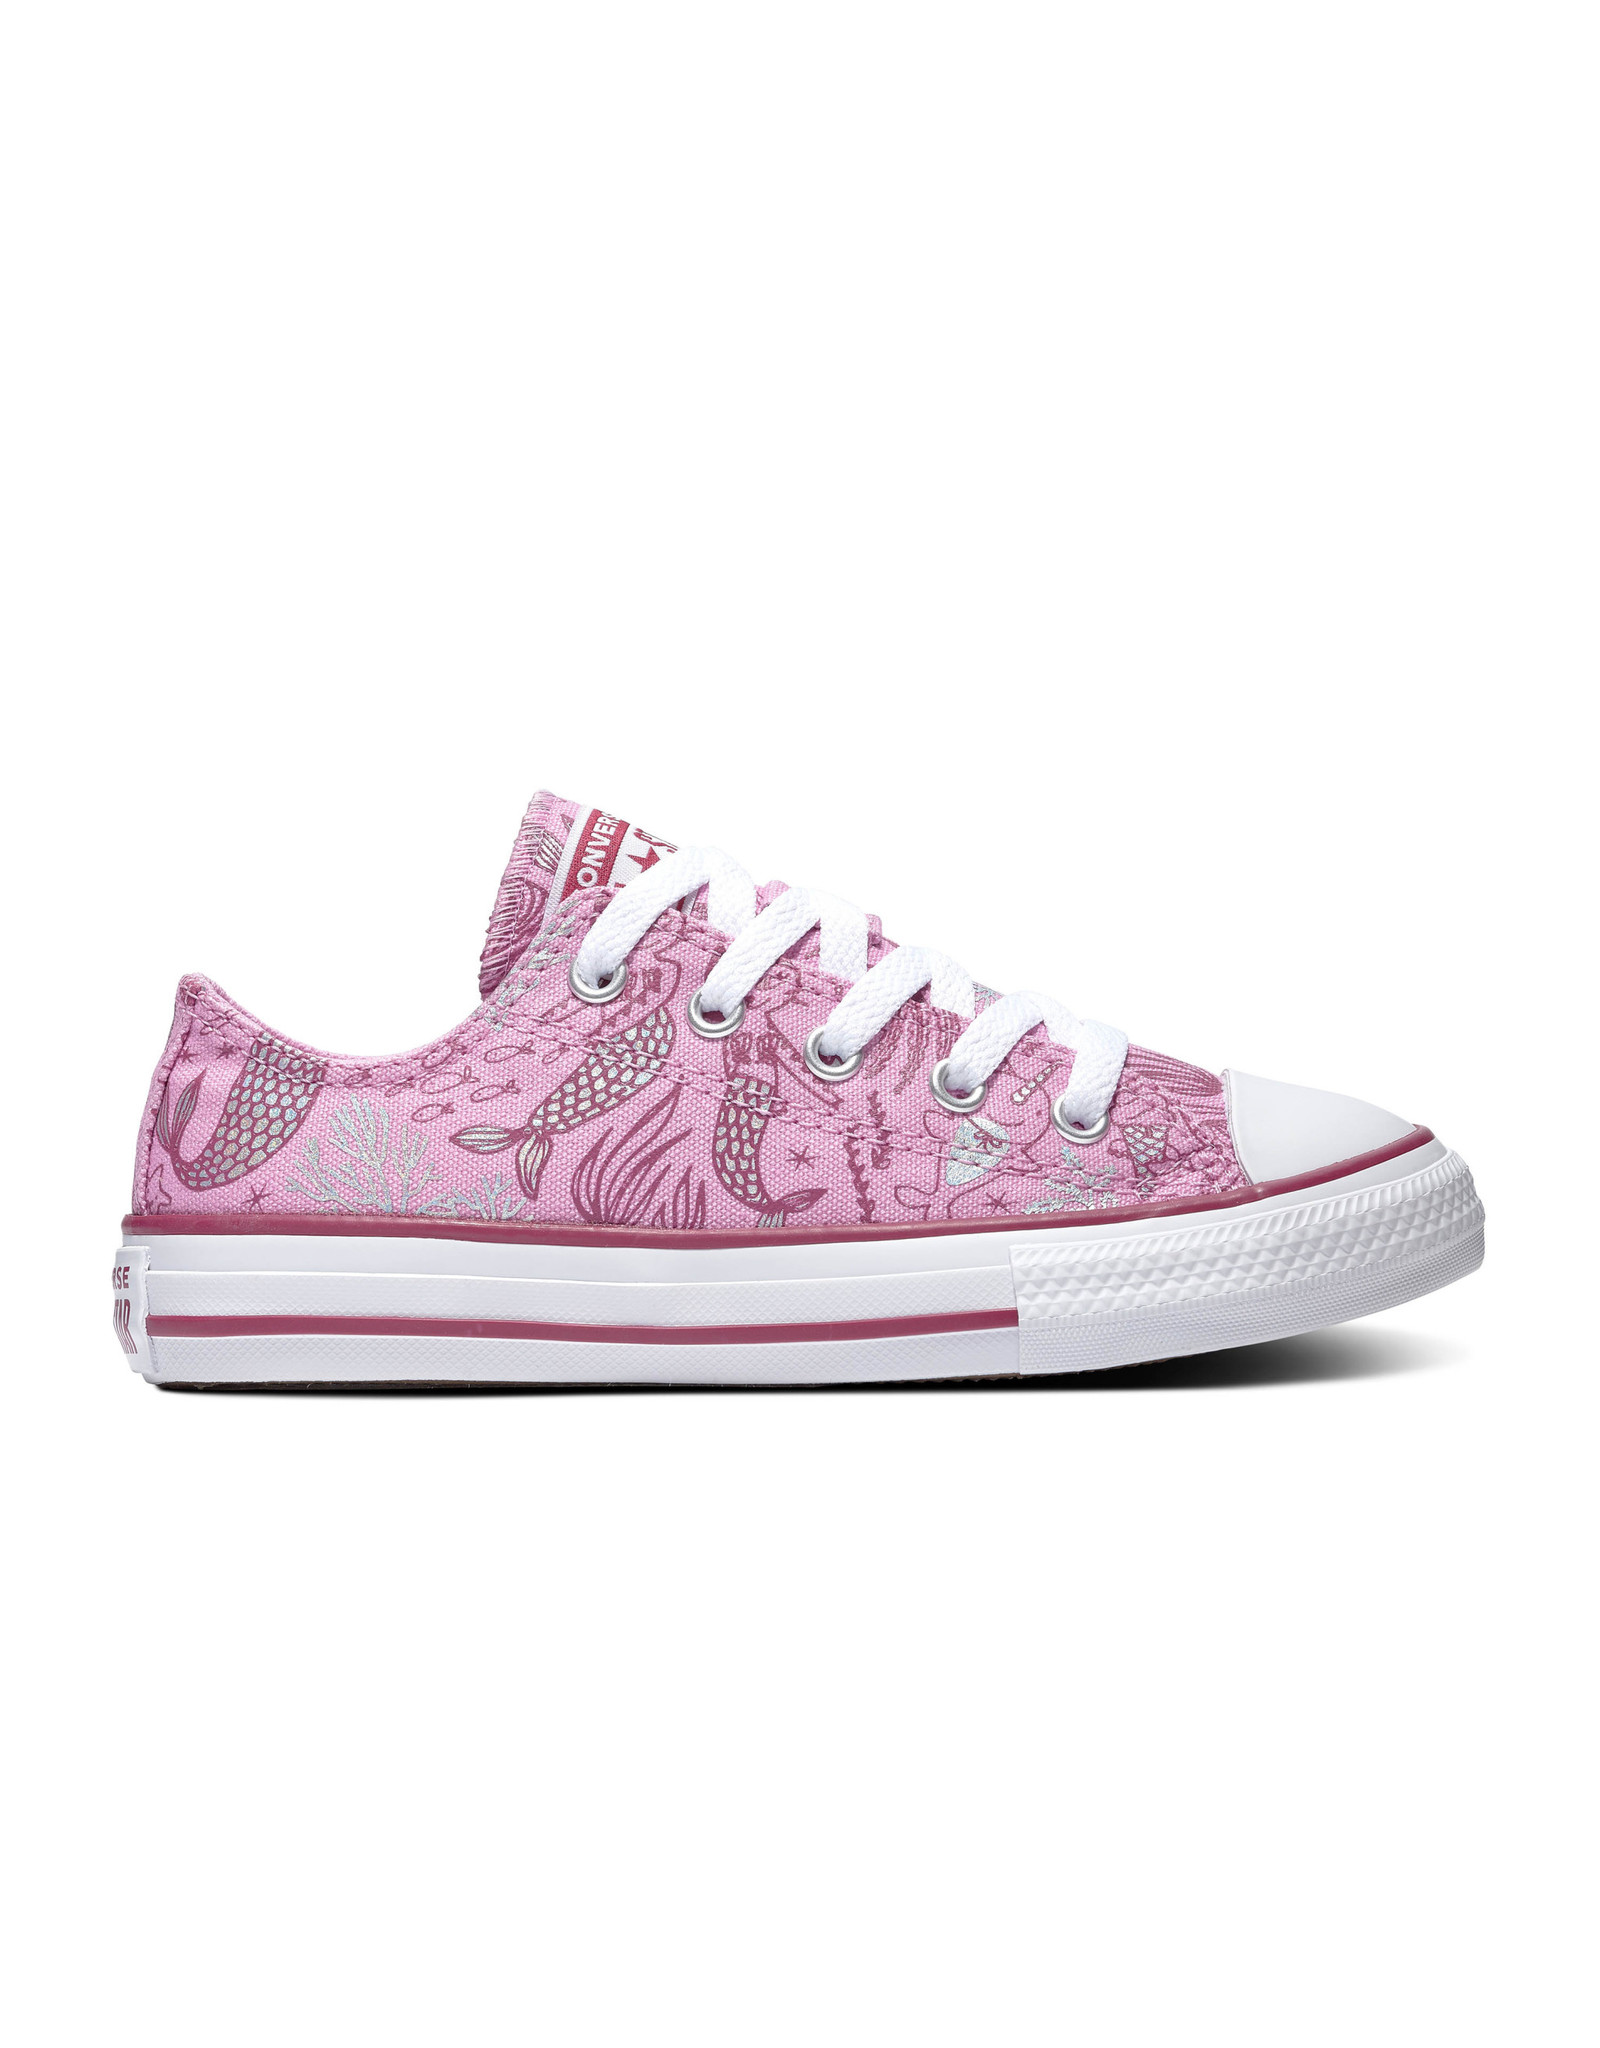 CONVERSE CHUCK TAYLOR ALL STAR  OX PEONY PINK/ROSE MAROON/WHITE CASIR-667204C